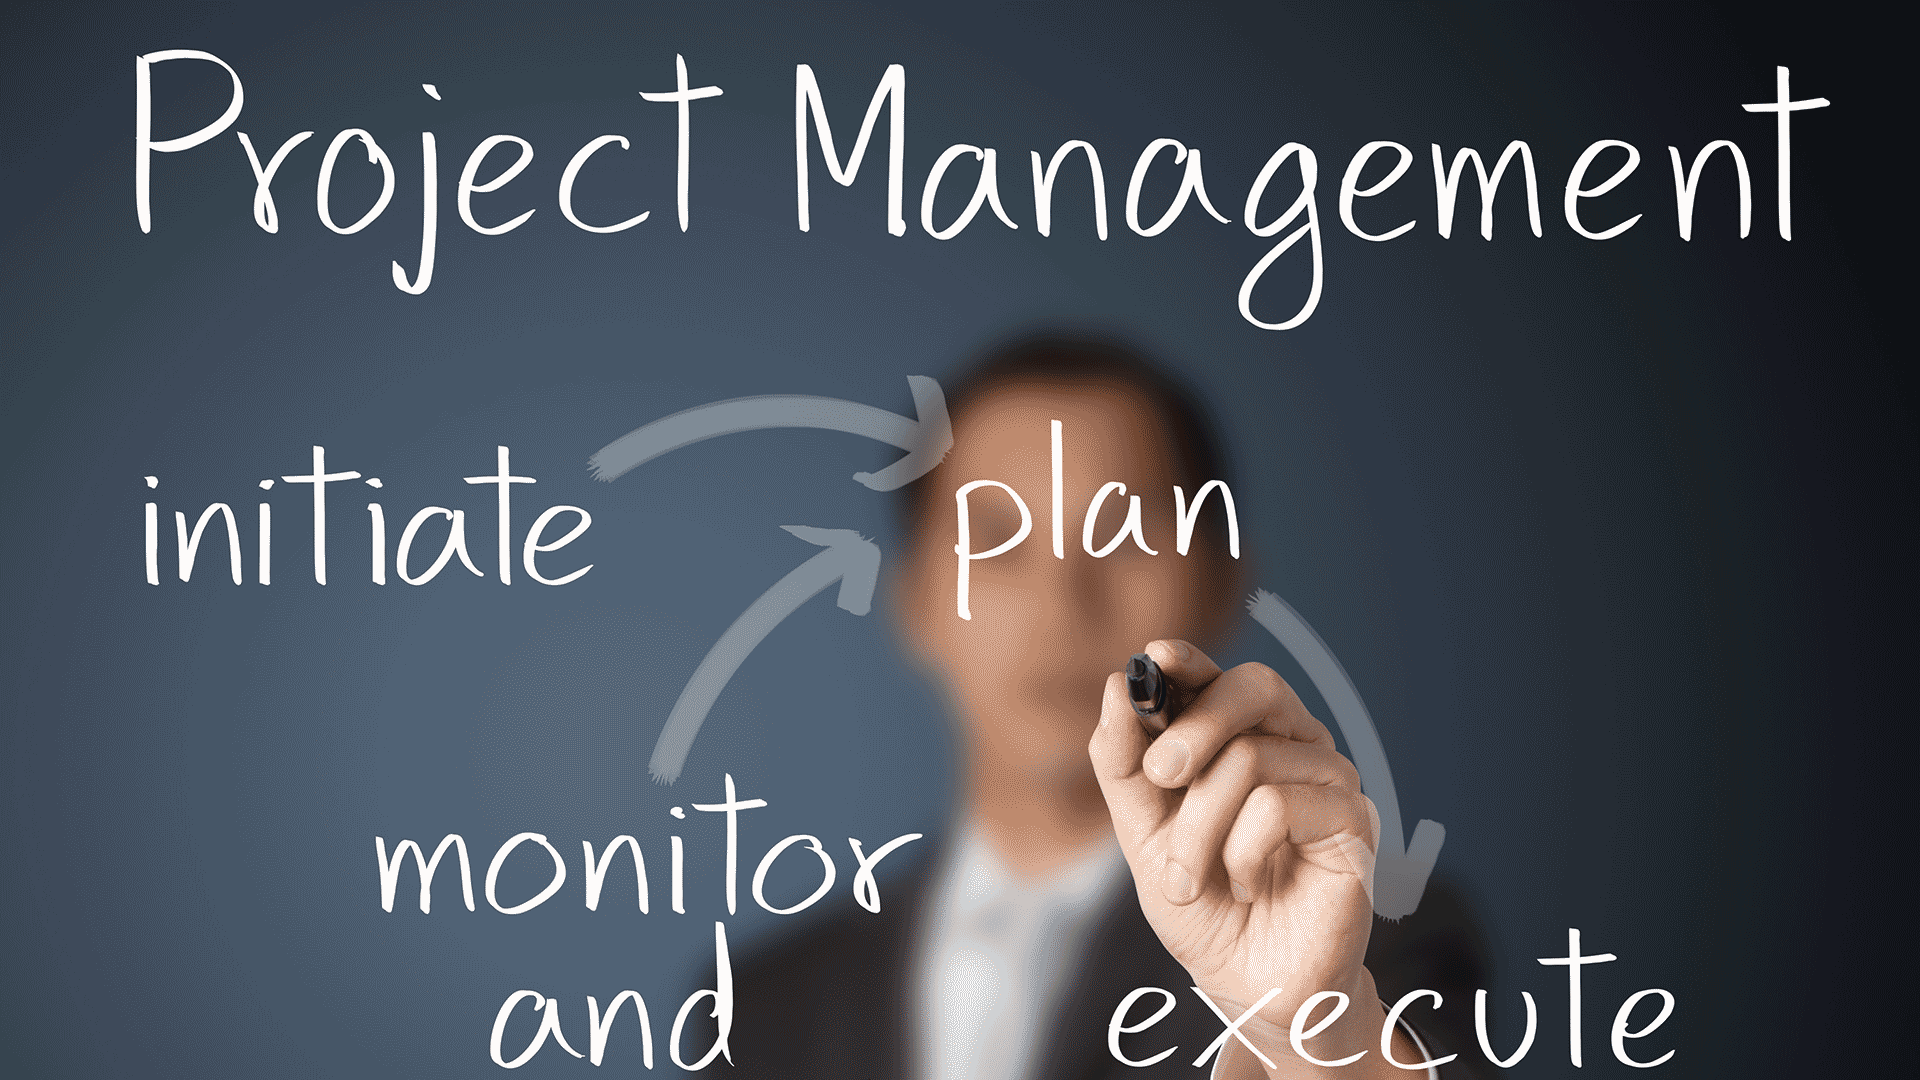 Project Management and Implementation